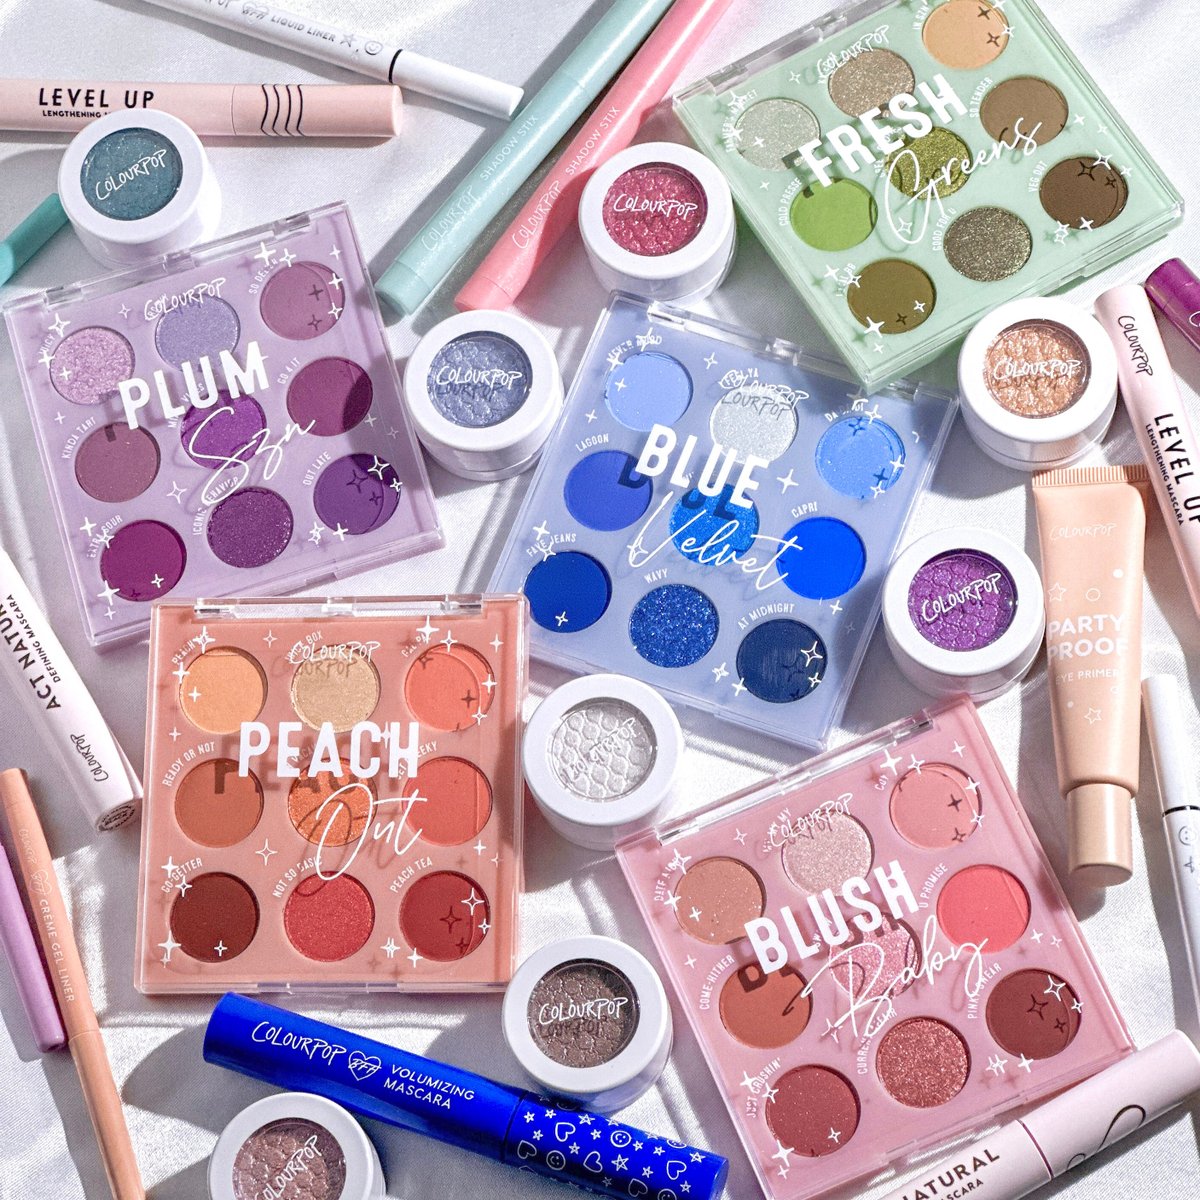 Did someone say SALE? 🤩 Shop all 9-pan palettes at @TargetStyle for $3 off (through Target Circle)!! 🌟🎯 @sadiexoxos #colourpopcosmetics #targetstyle #targetrun